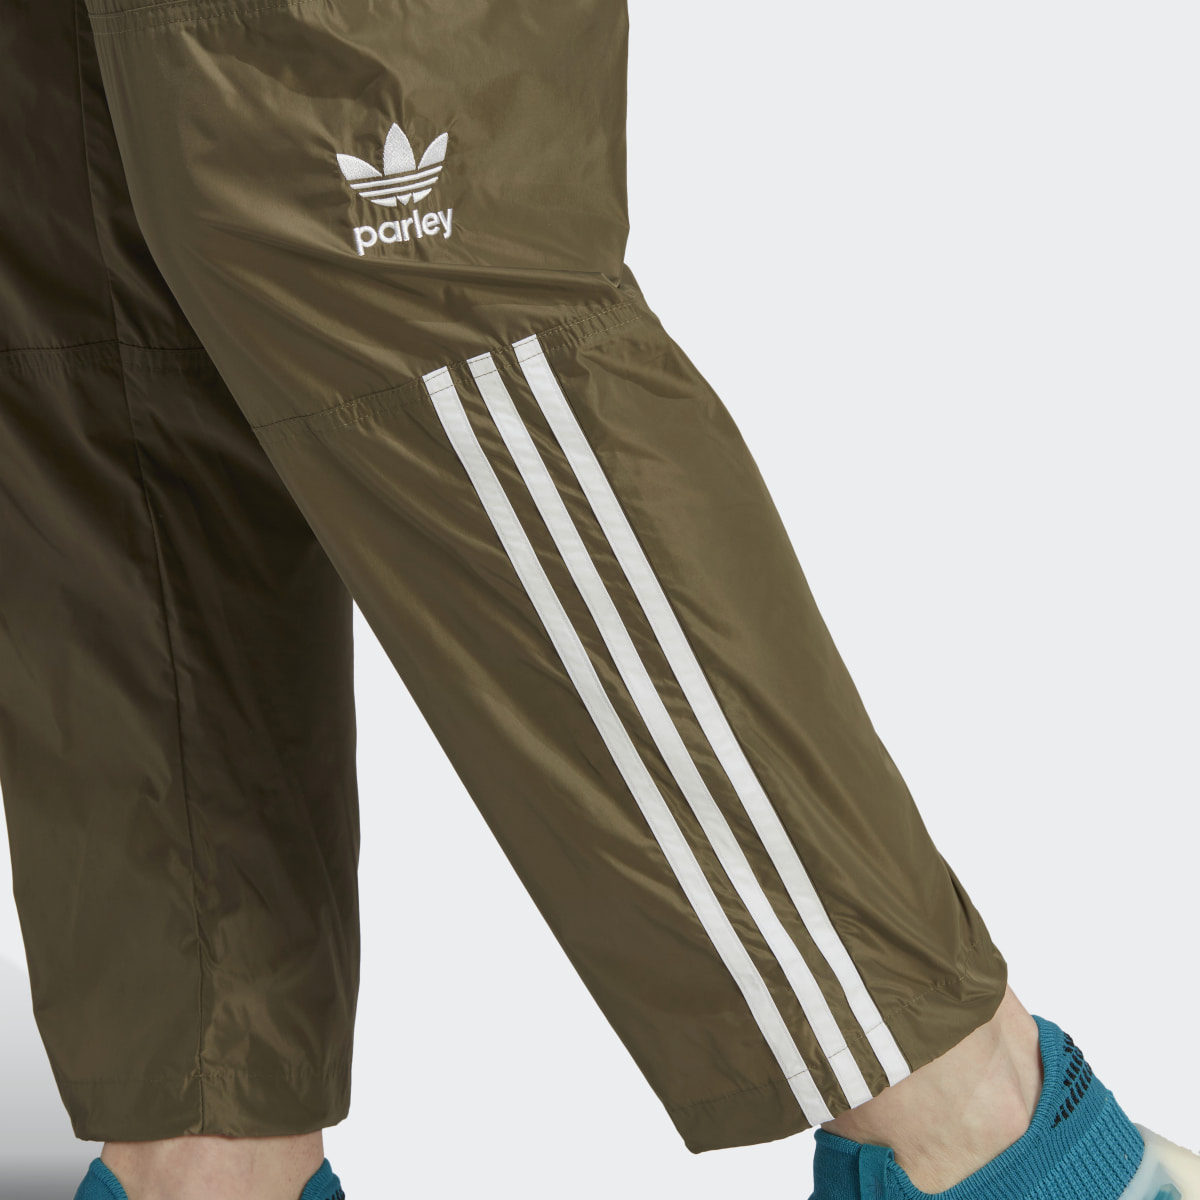 Adidas Adicolor Parley Tracksuit Bottoms. 5